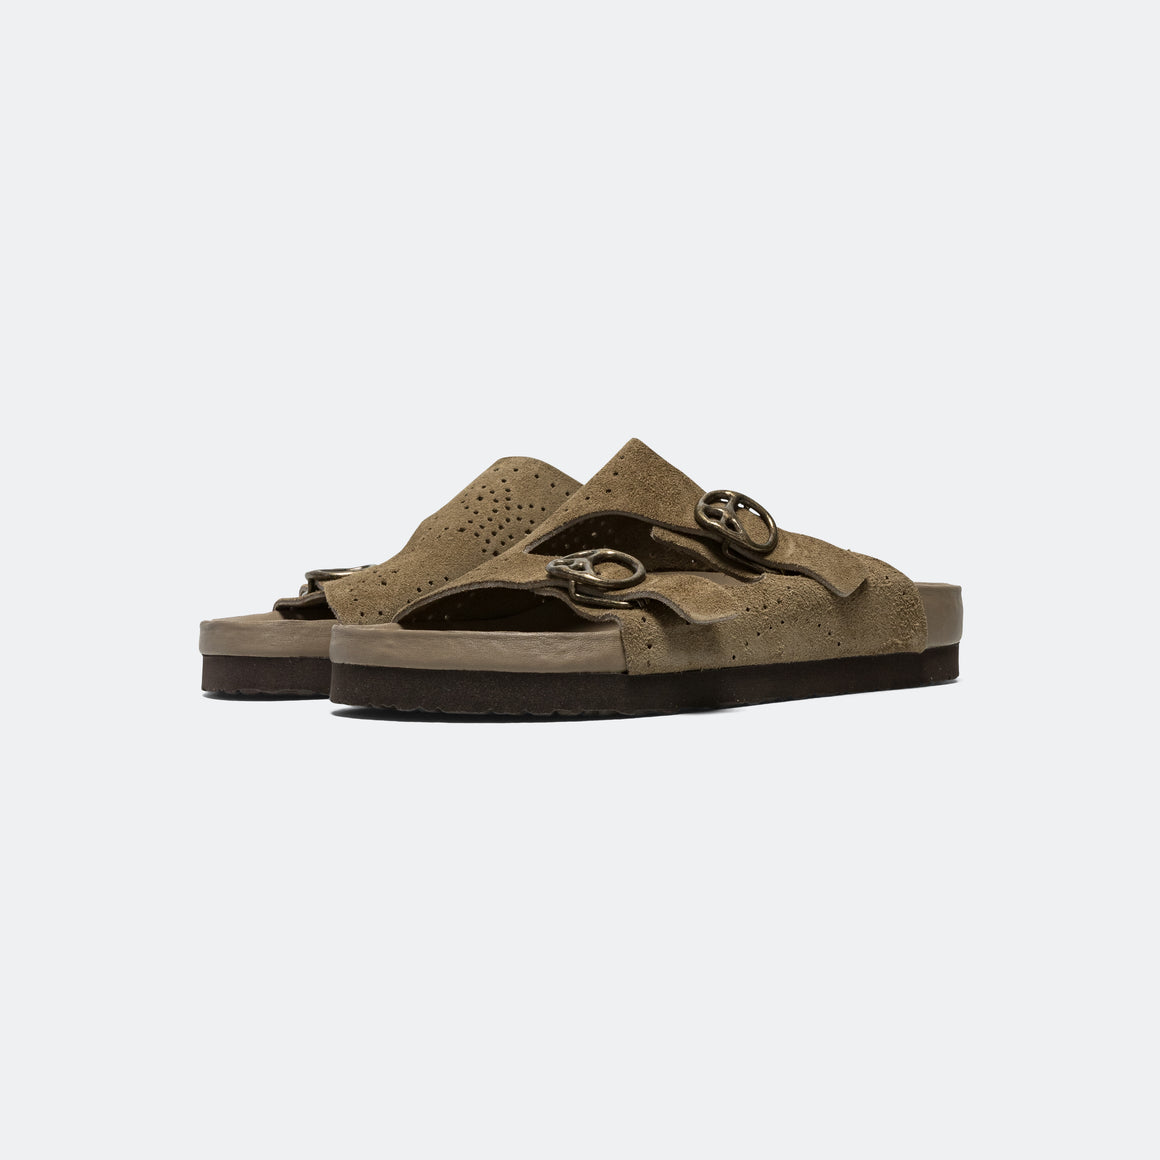 Double  Strap Sandal - Taupe Suede Leather